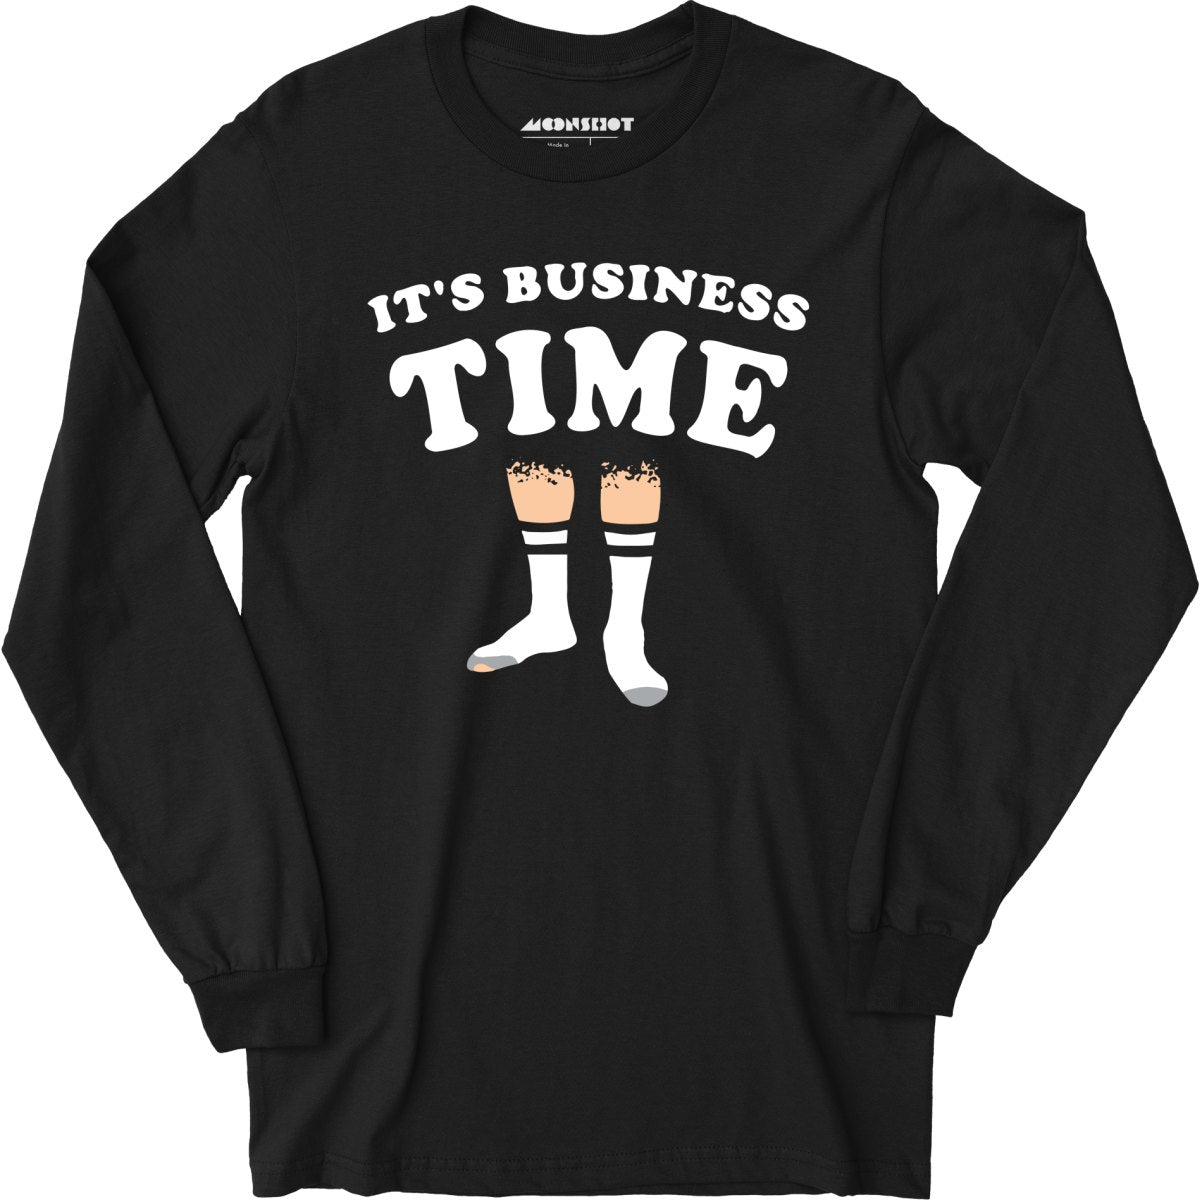 It's Business Time - Long Sleeve T-Shirt